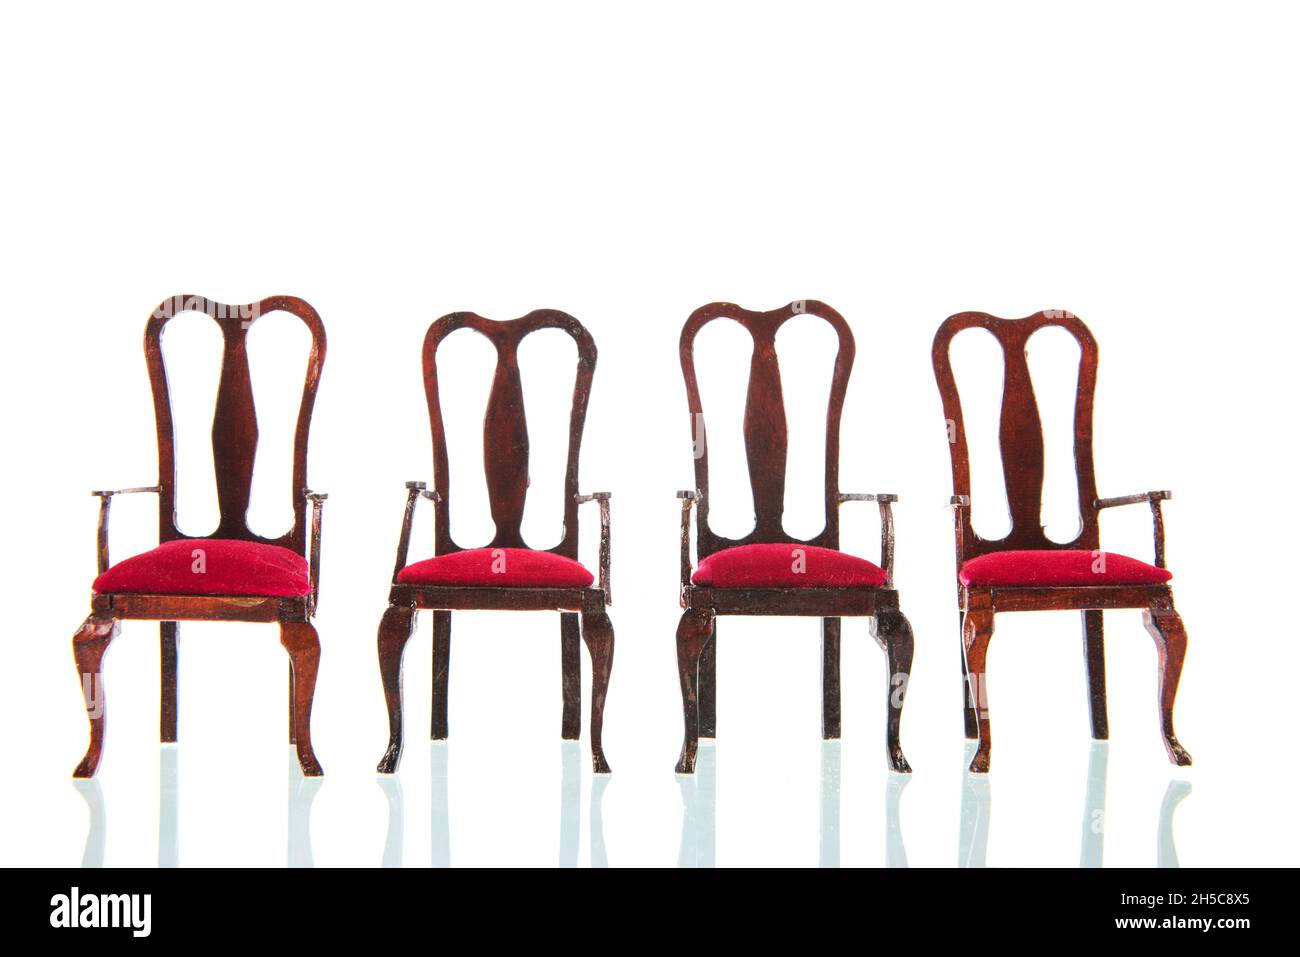 Queen ann style chairs isolated over white background Stock Photo - Alamy